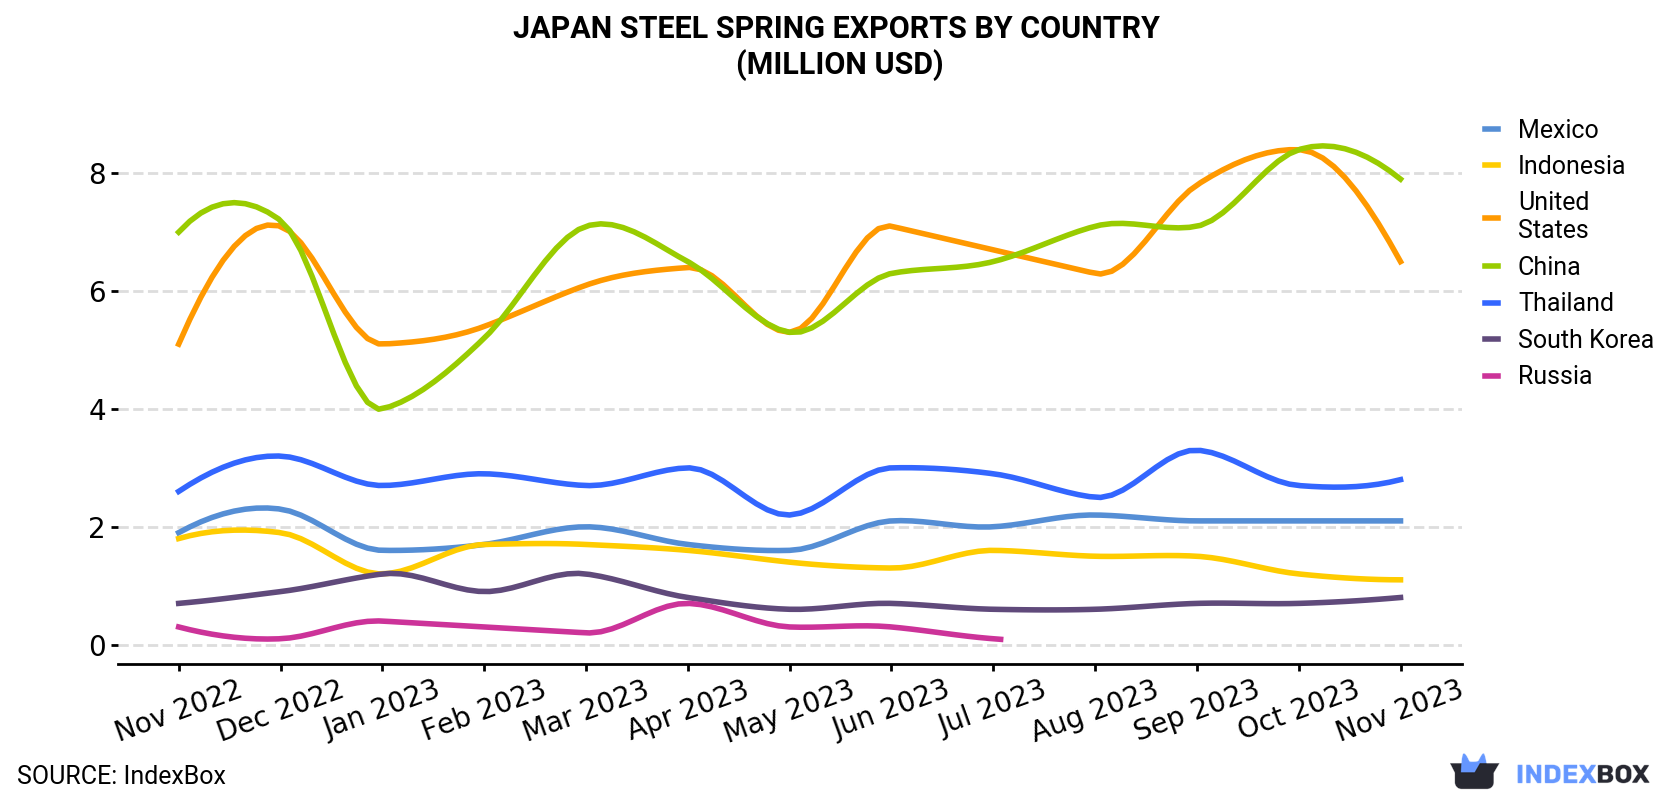 Japan Steel Spring Exports By Country (Million USD)